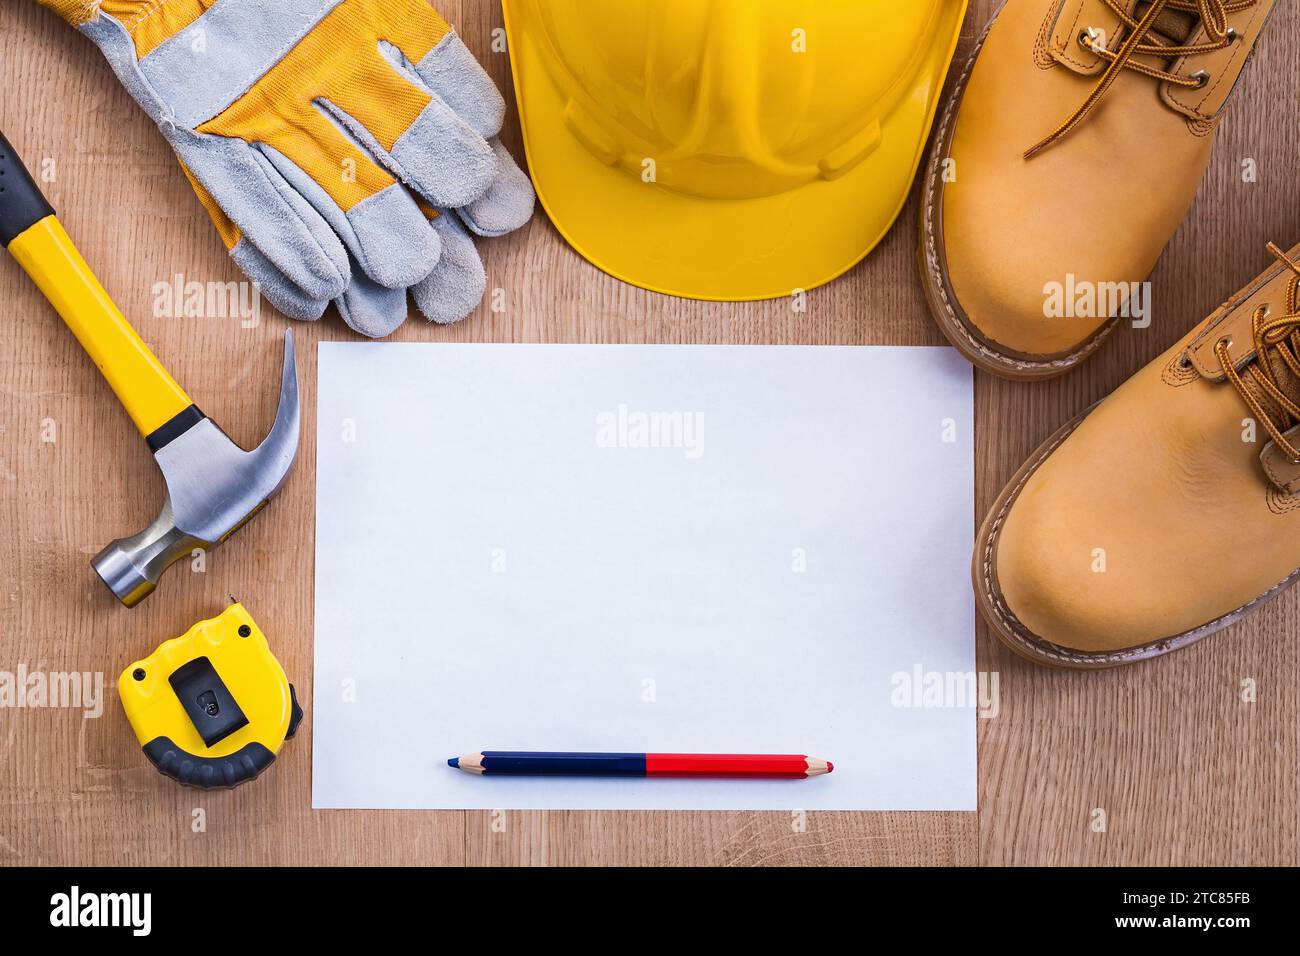 Pencil and paper tapeline hammer working boots helmet gloves on wooden board with copyspace Stock Photo